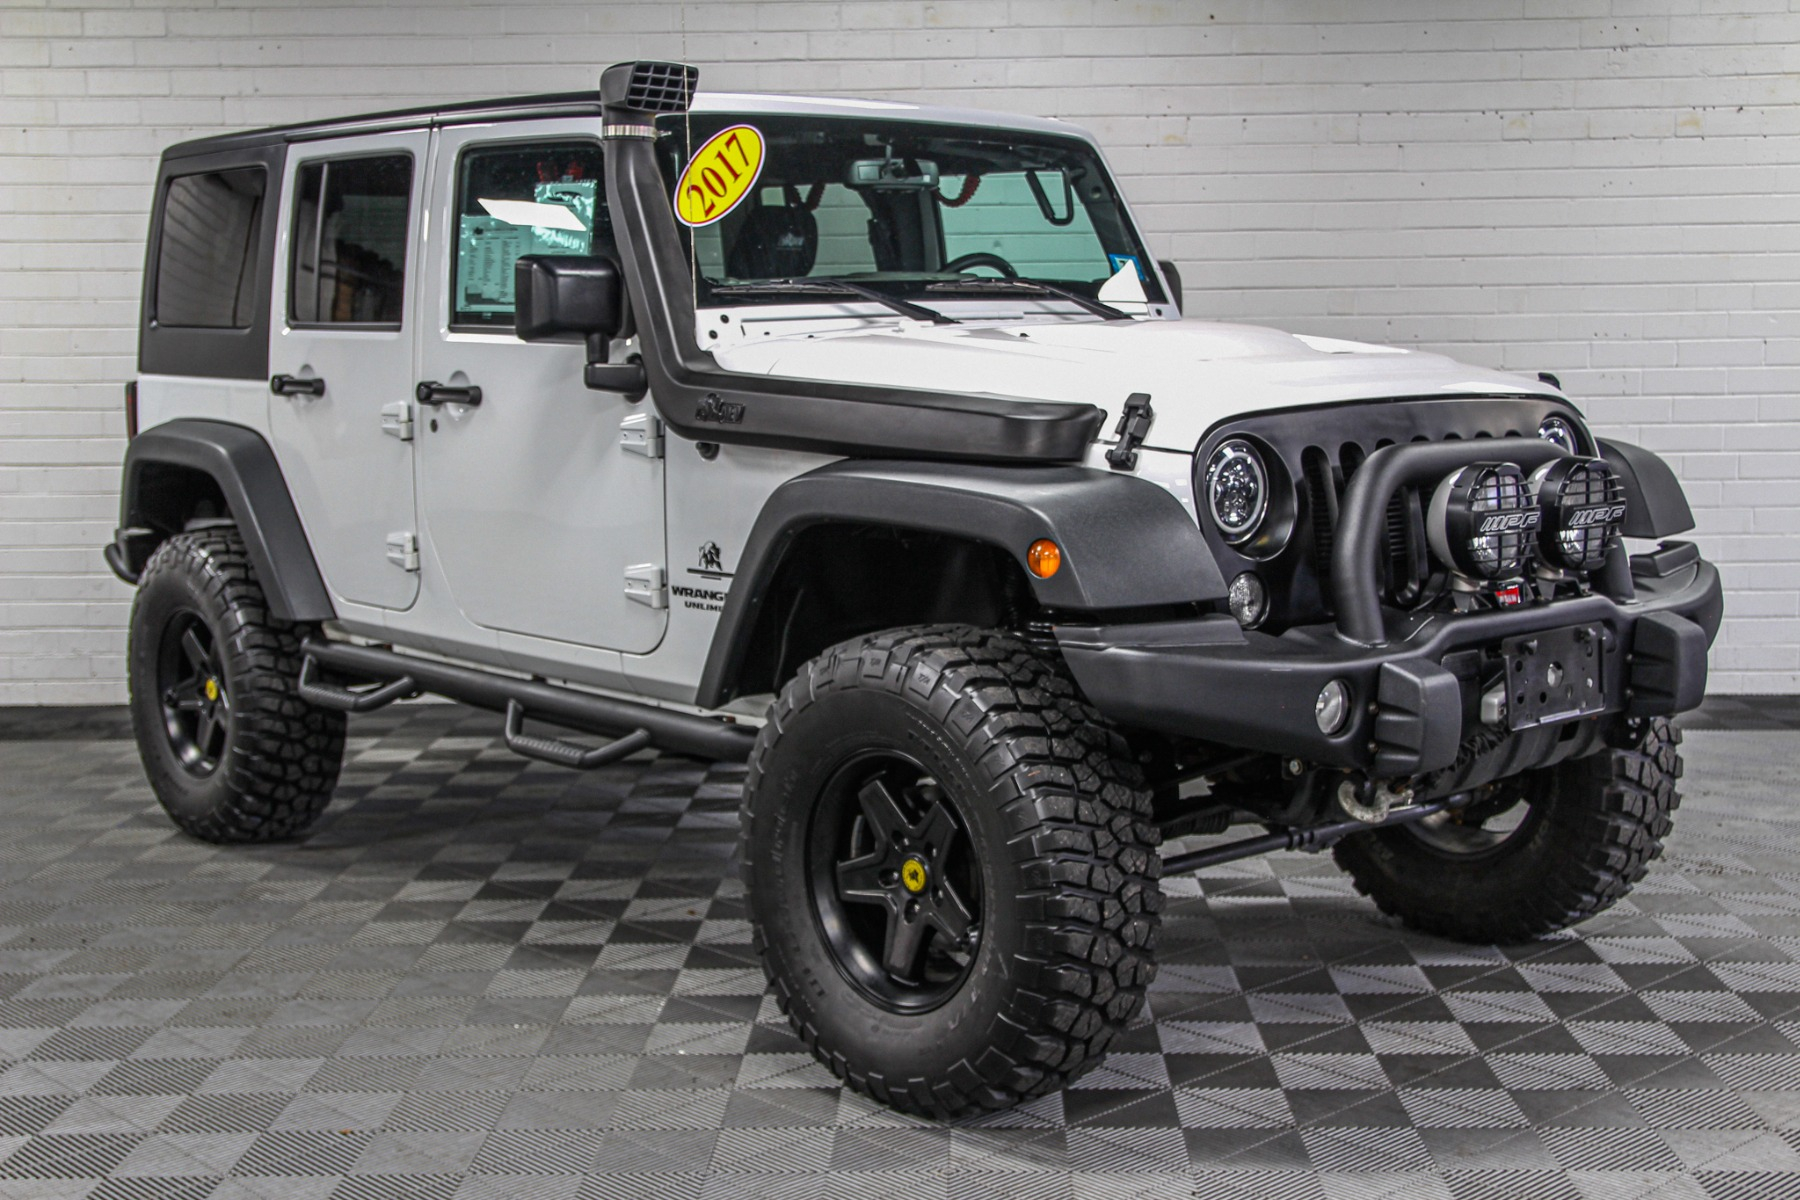 Pre-Owned 2017 Jeep Wrangler Unlimited AEV Sport S White for Sale!